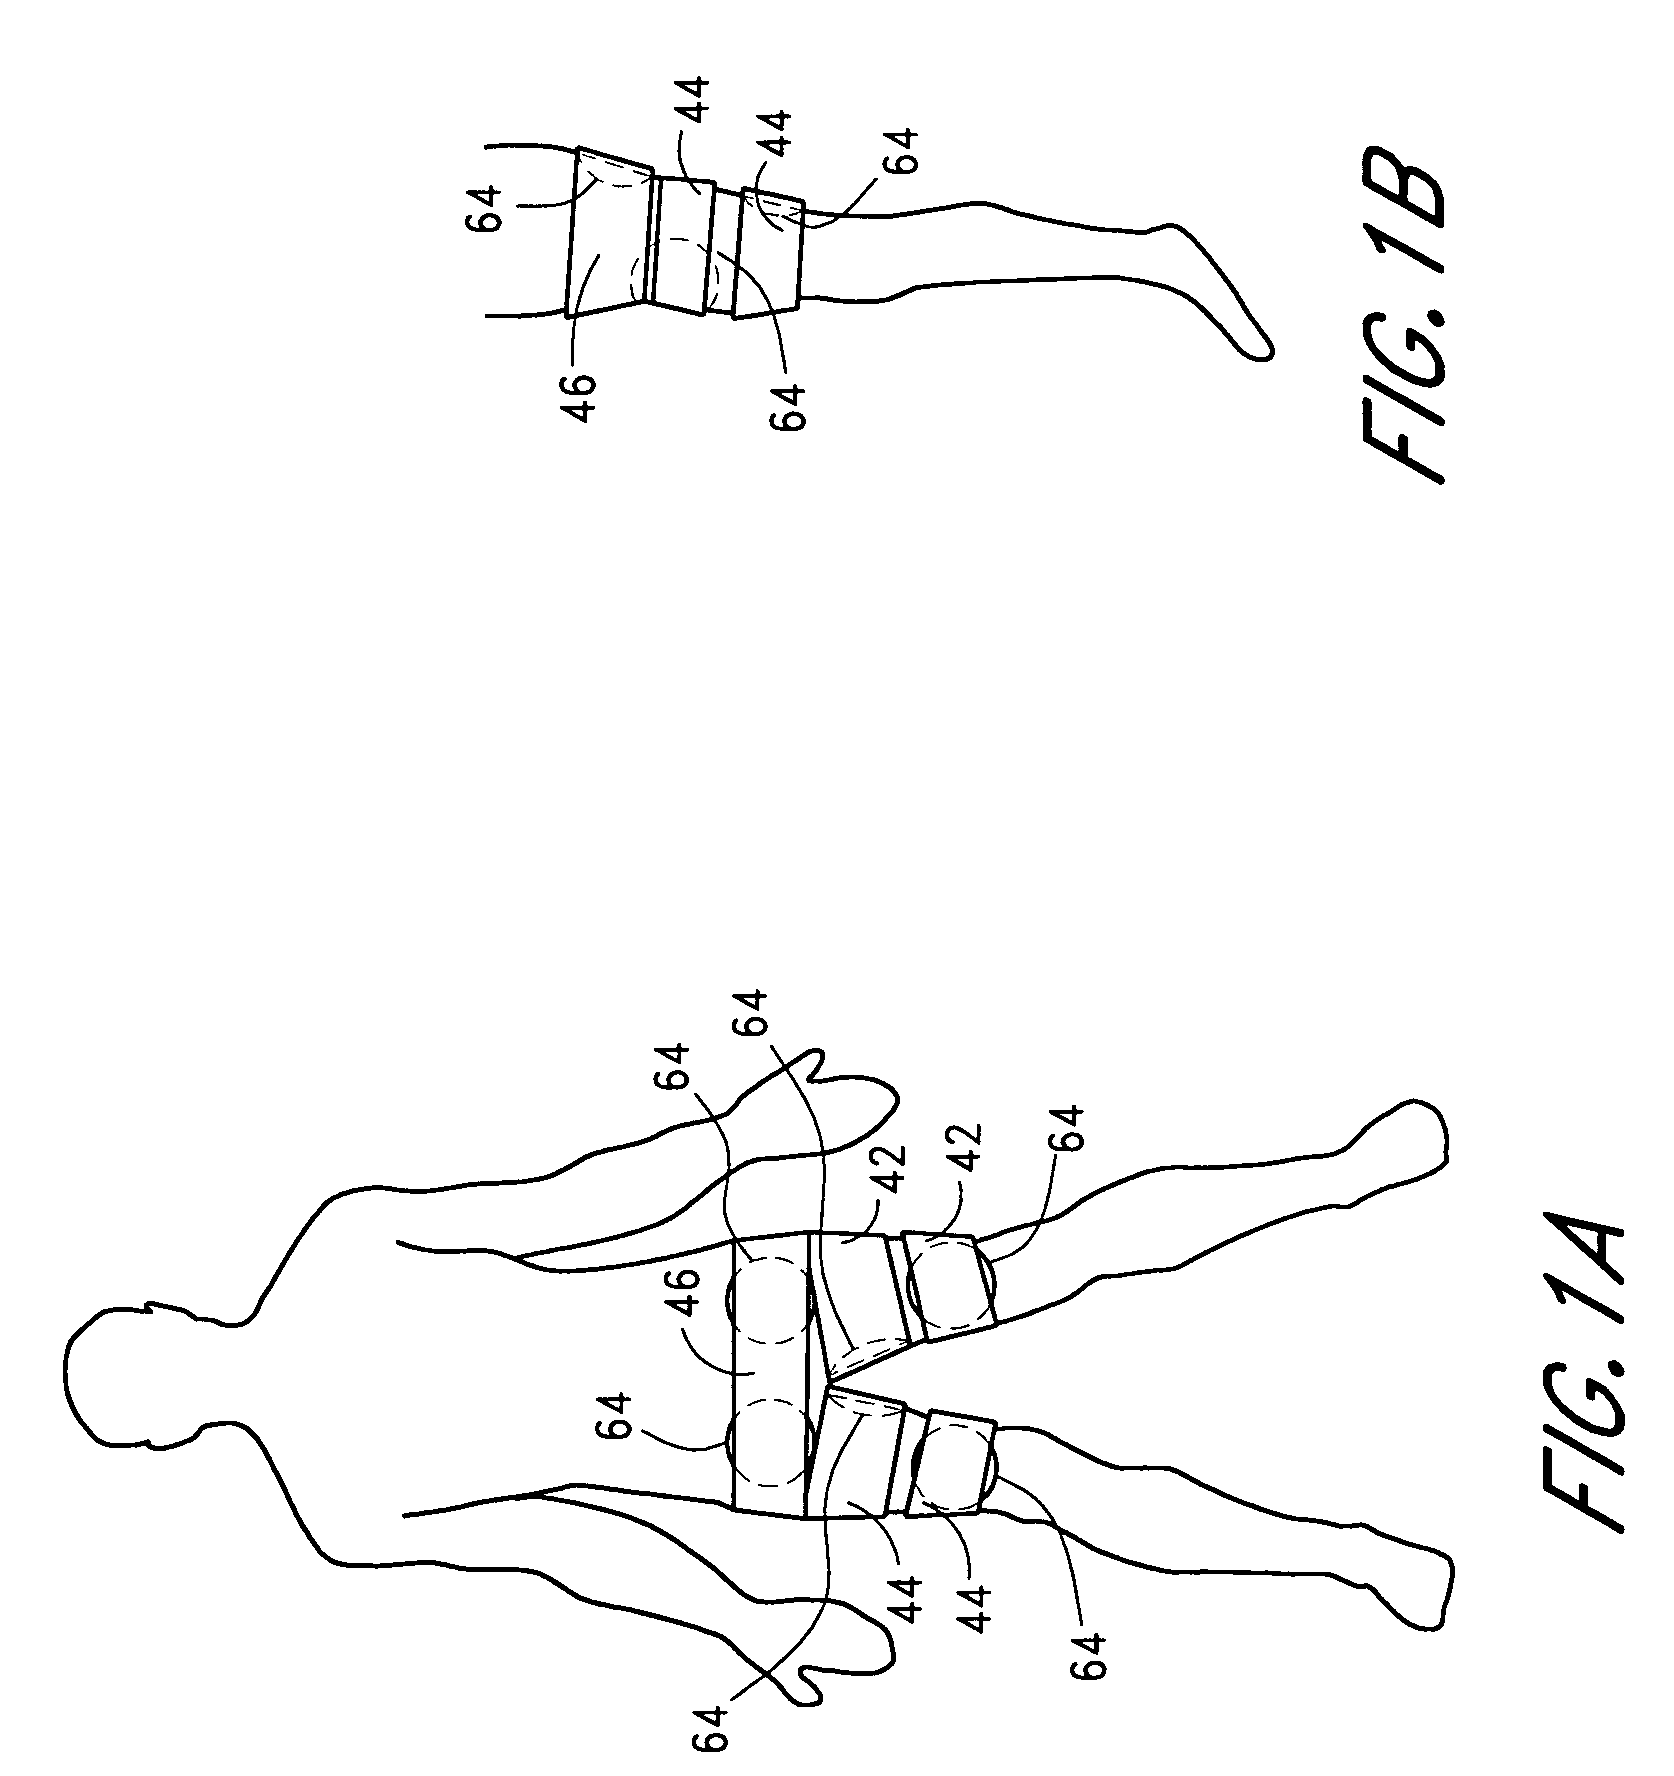 High-efficiency external counterpulsation apparatus and method for performing the same